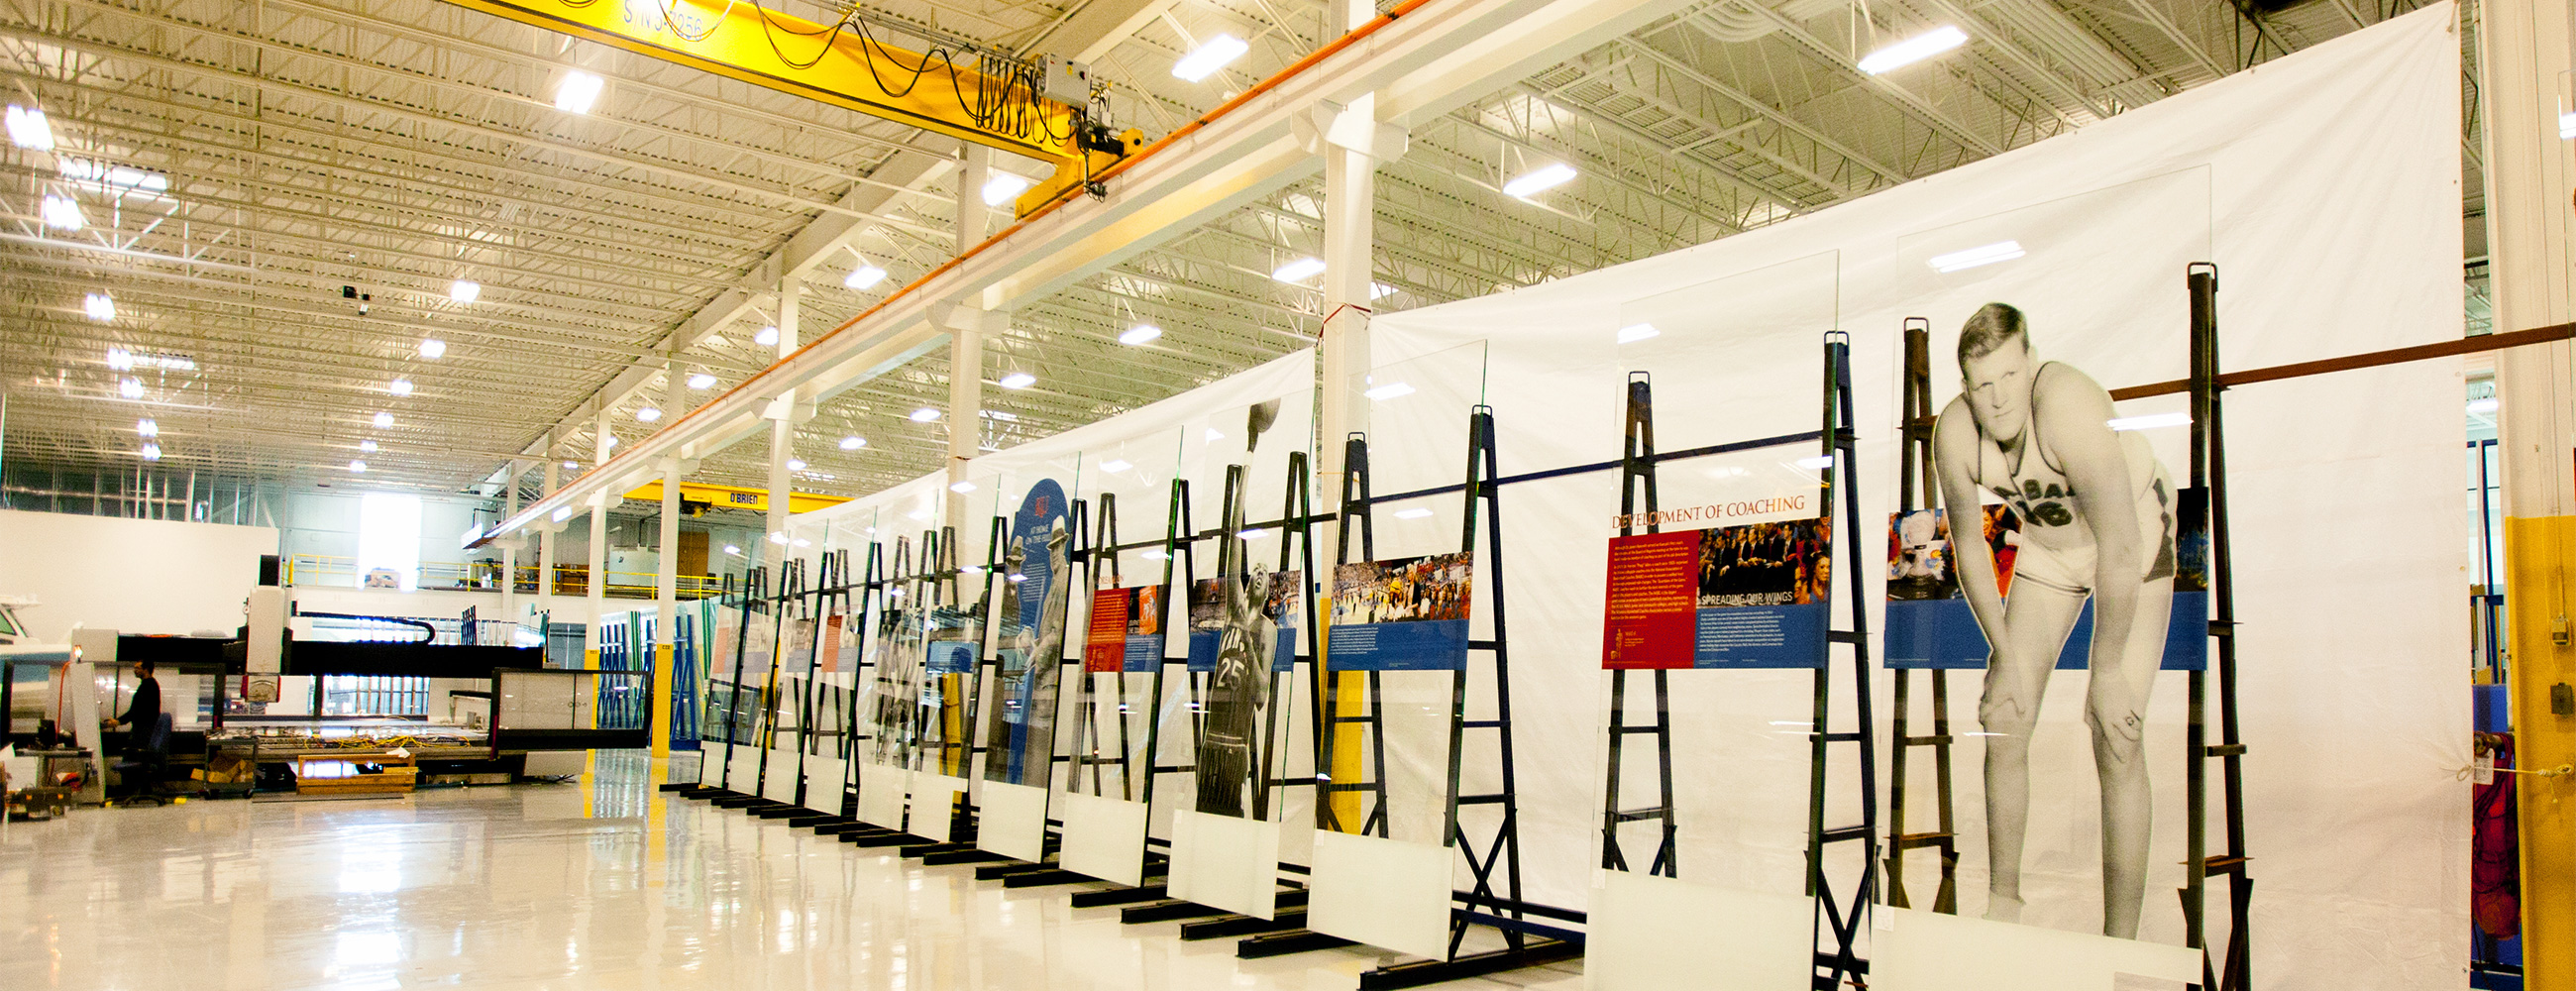 View of the digitally-printed images of the history of basketball on glass mural, inside the AGNORA plant.